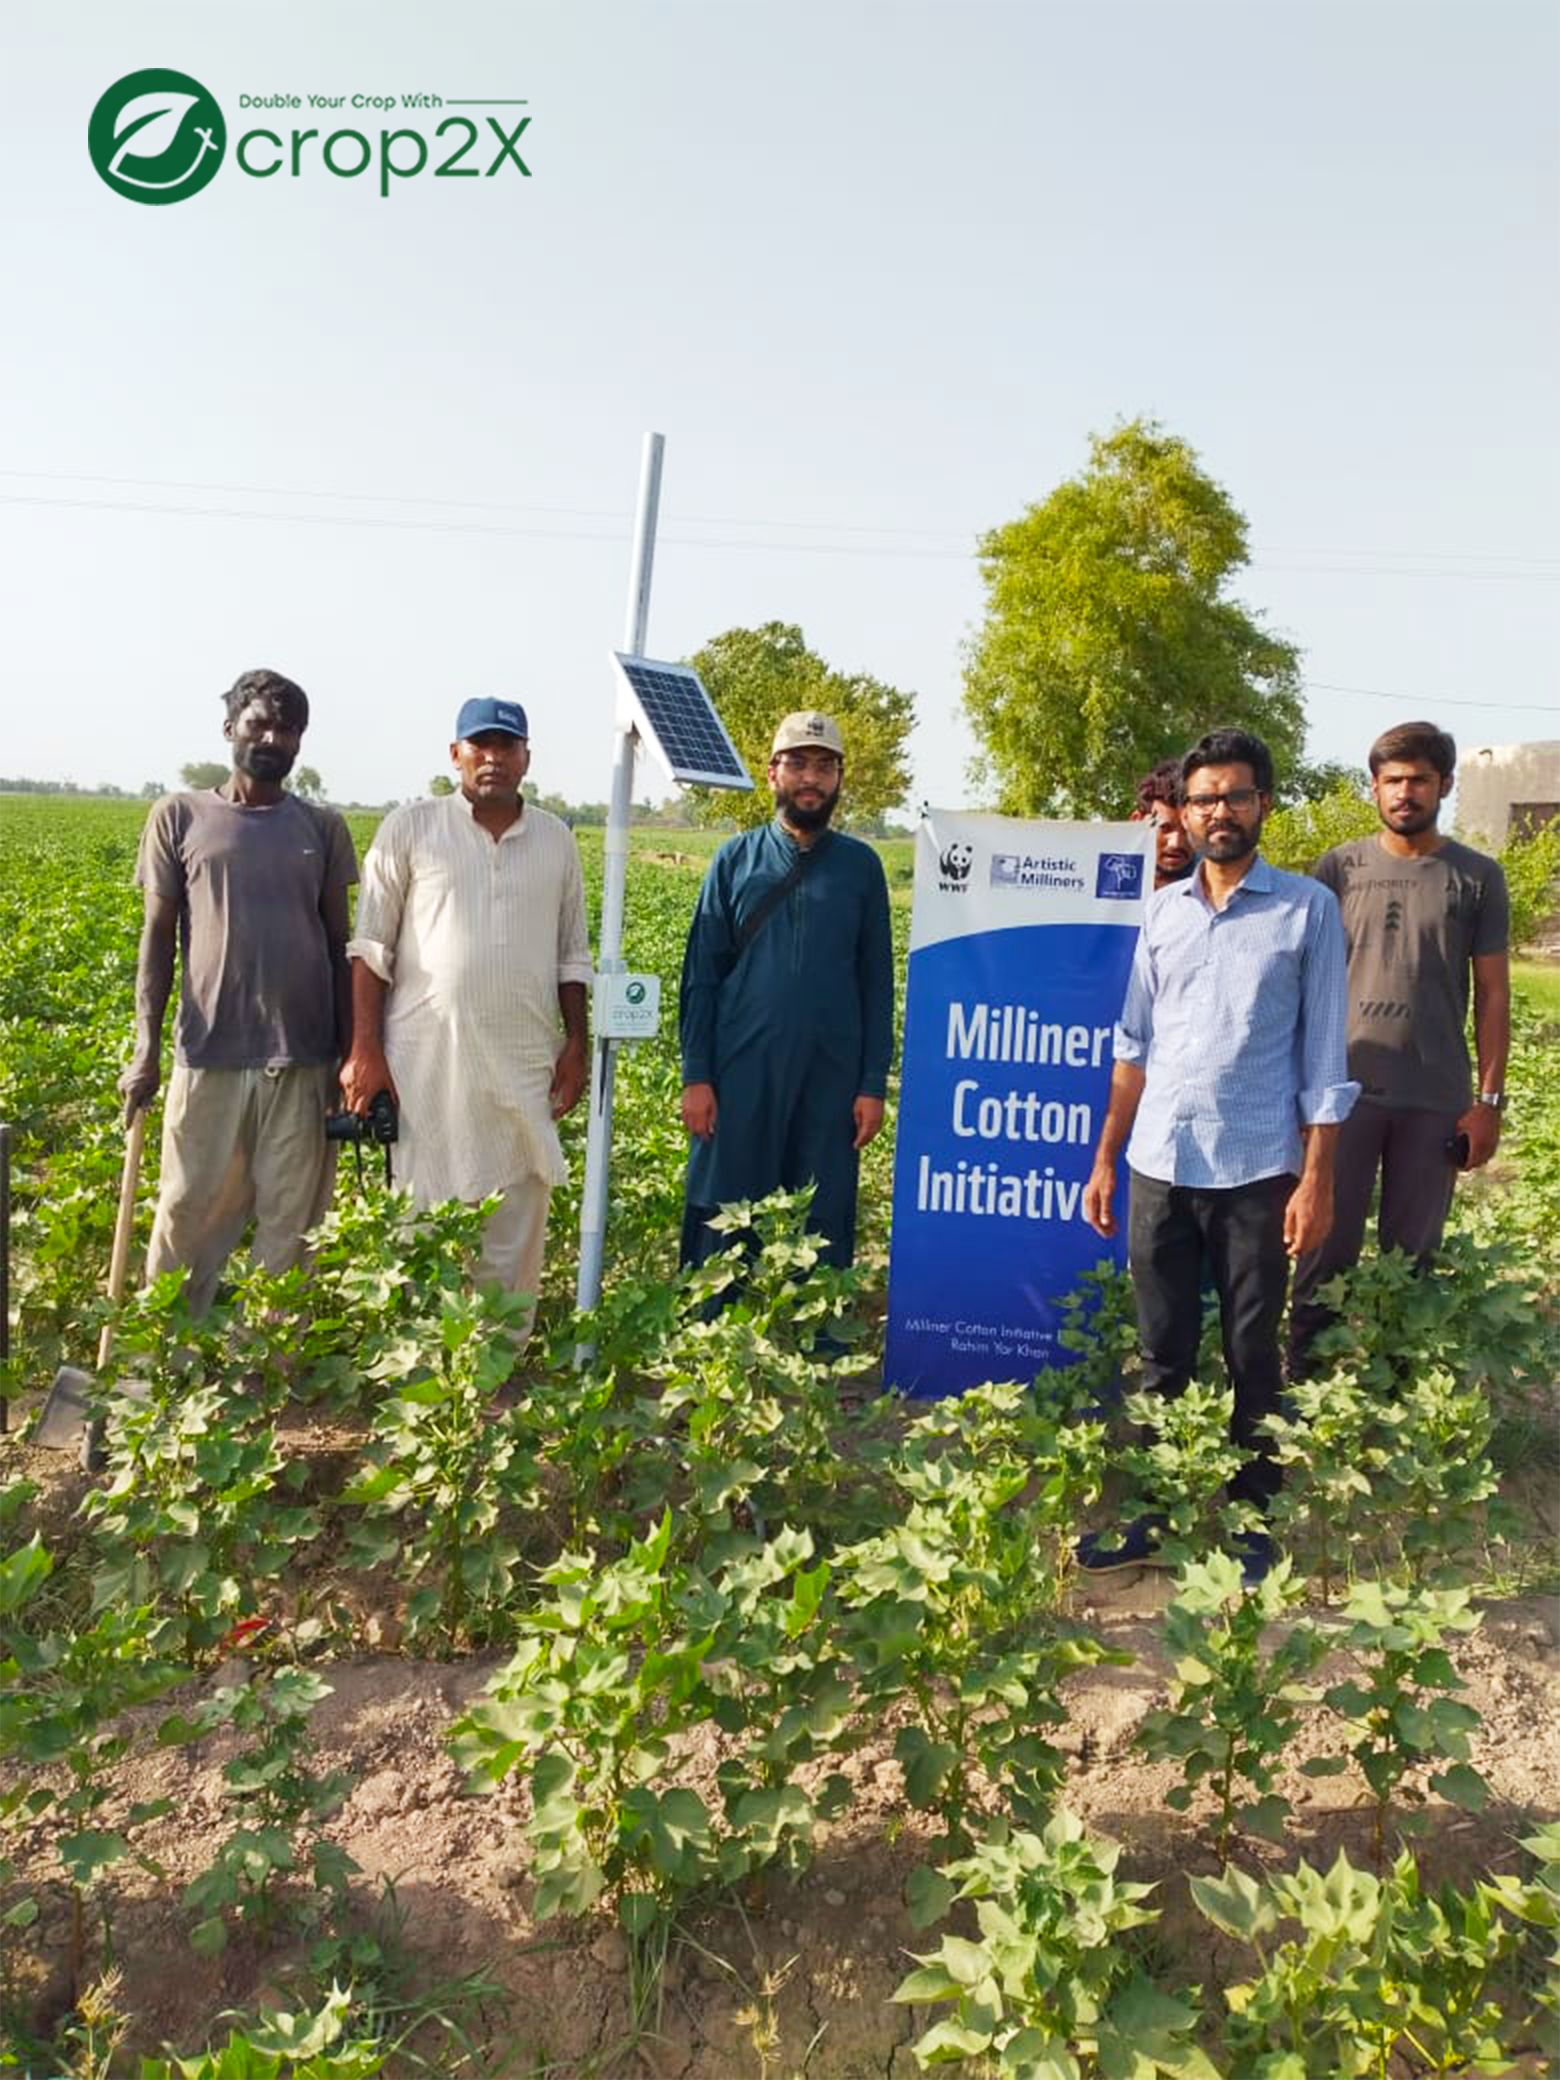 successfully deployed sensor probes at farms of the Artistic Milliners MCI (Milliner’s Cotton Initiative) program.￼